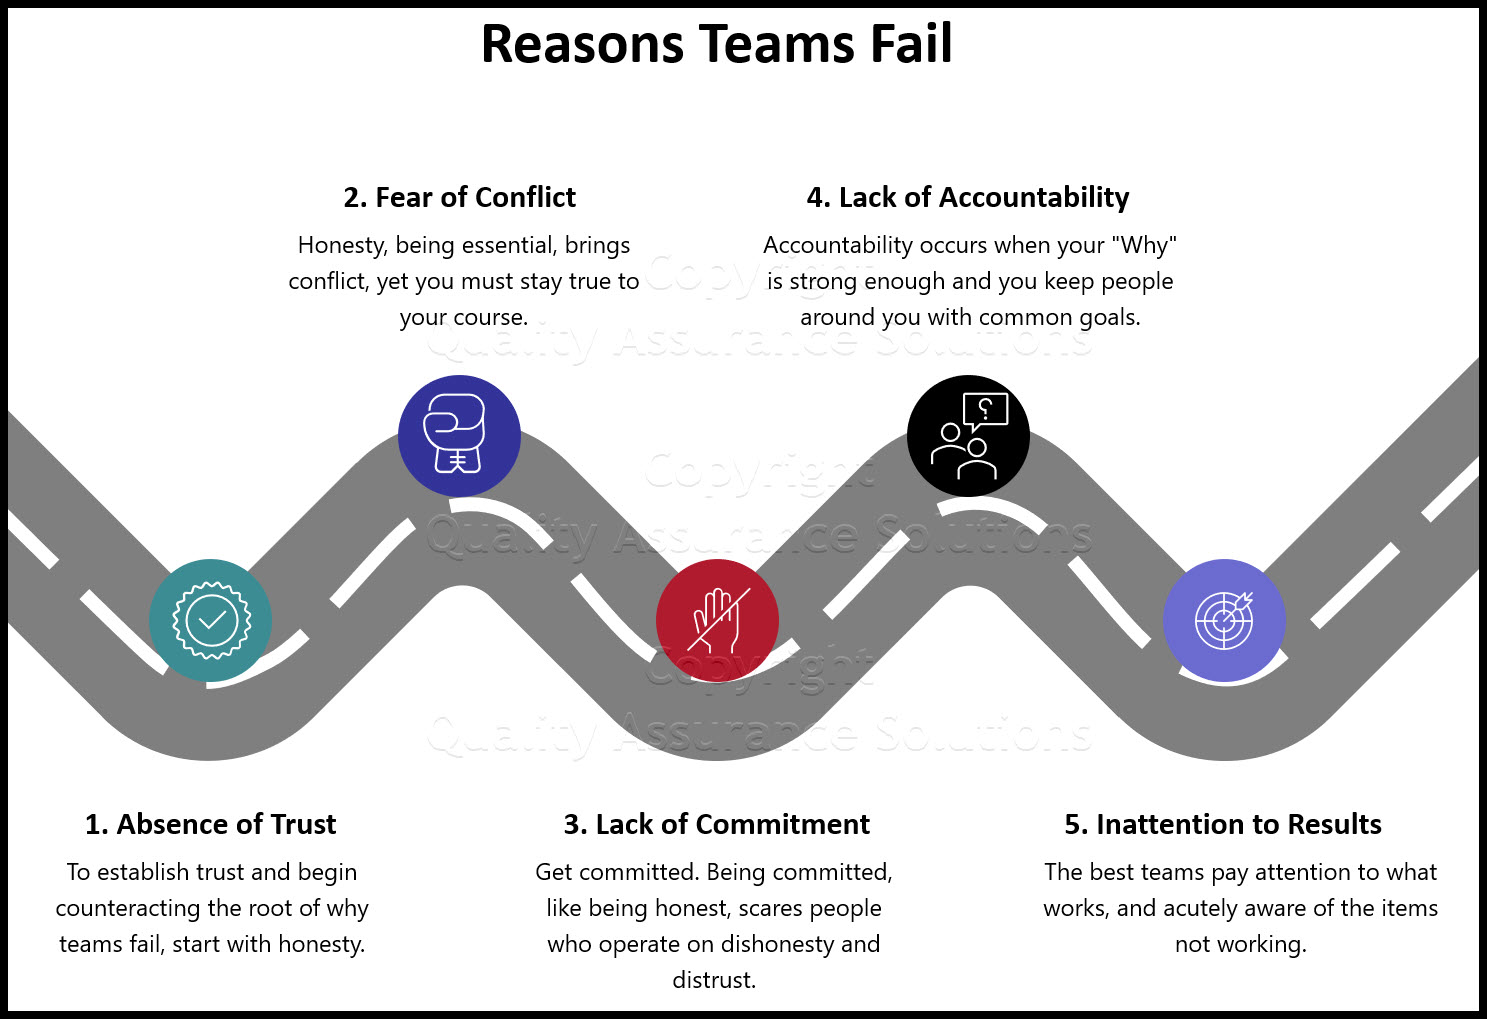 Why teams fail? The source of failure is dysfunction, do you know the 5 laws of dysfunctional teams?